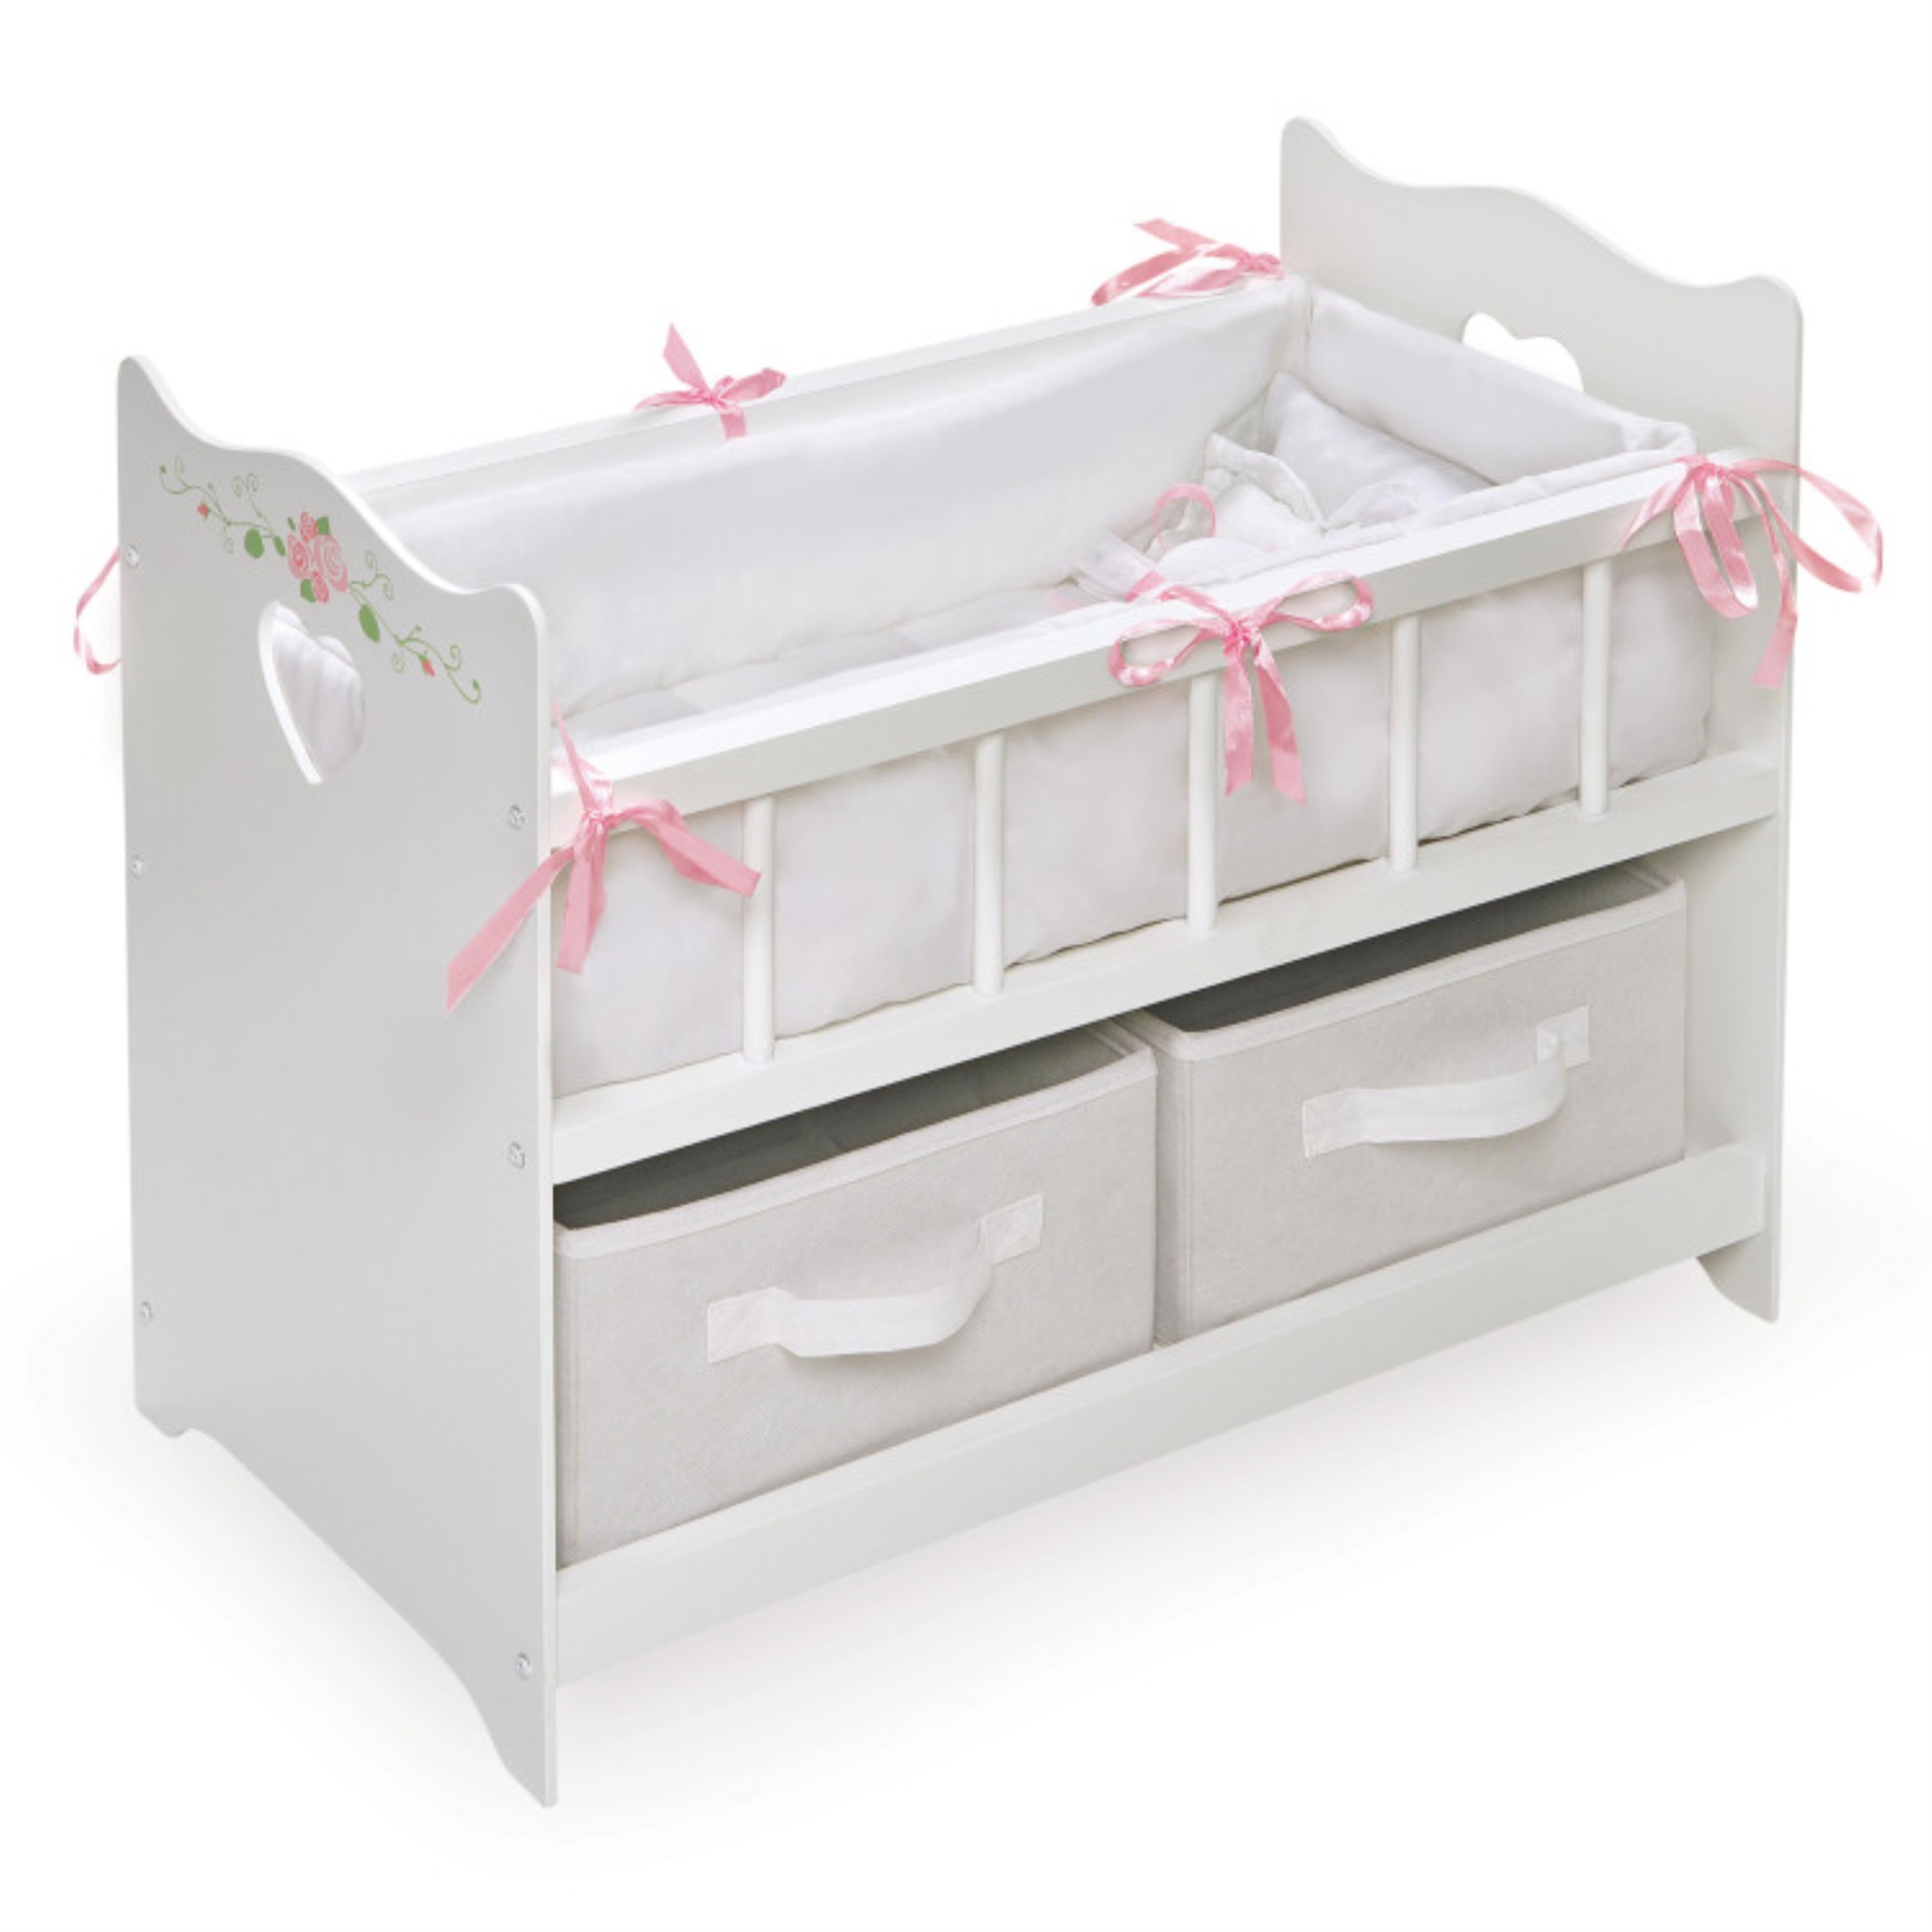 badger basket toy doll bed with white bedding, storage baskets, and personalization kit for 20 inch dolls - white rose